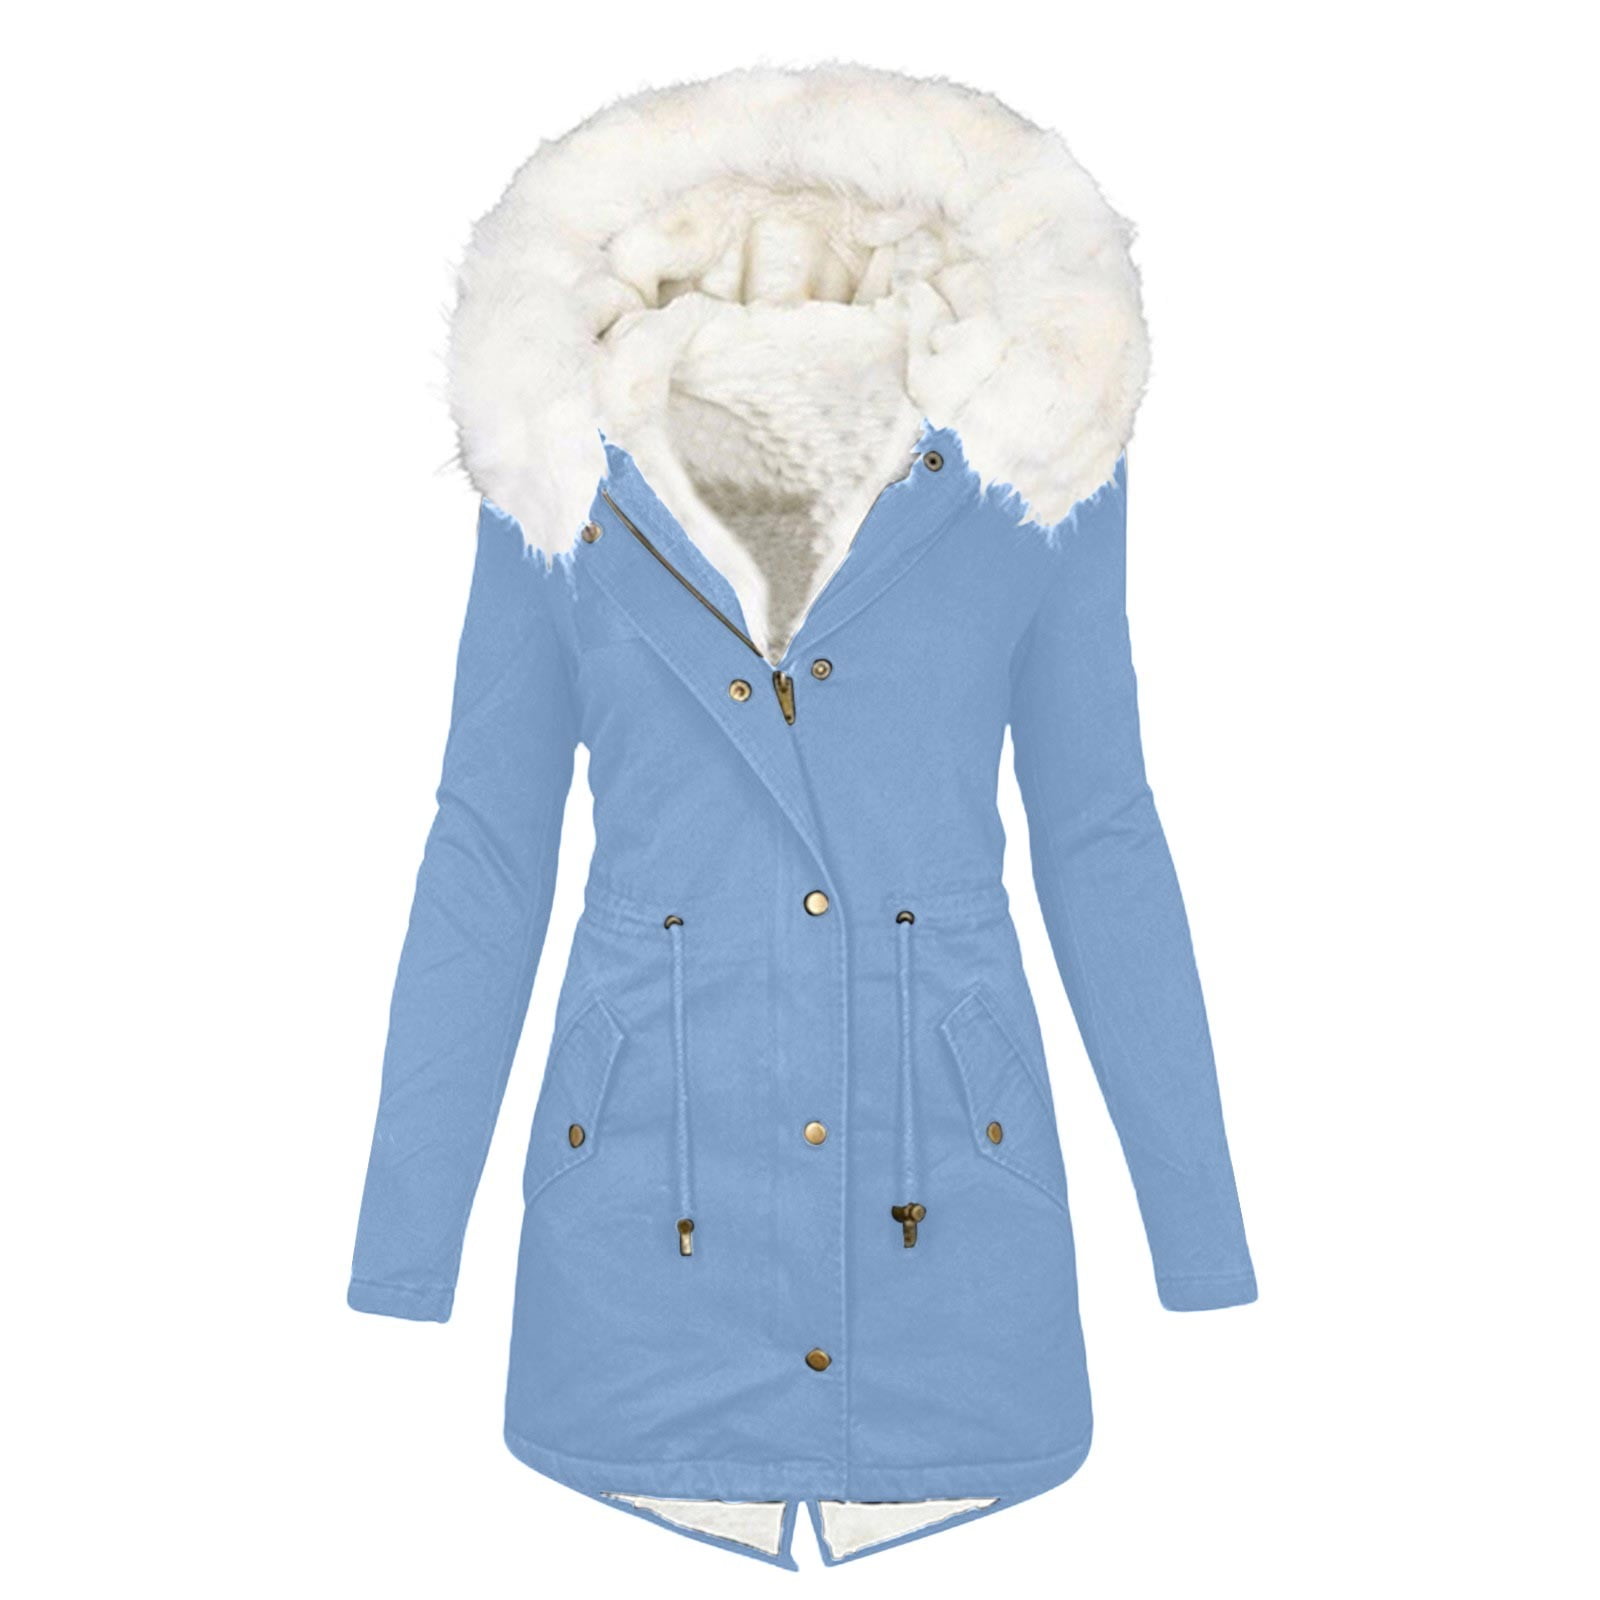 Popular Hot Style Light Blue Faux Fur Lined Parka Winter Short Navy Coat  For Women With Bright Beads - Fur & Faux Fur - AliExpress